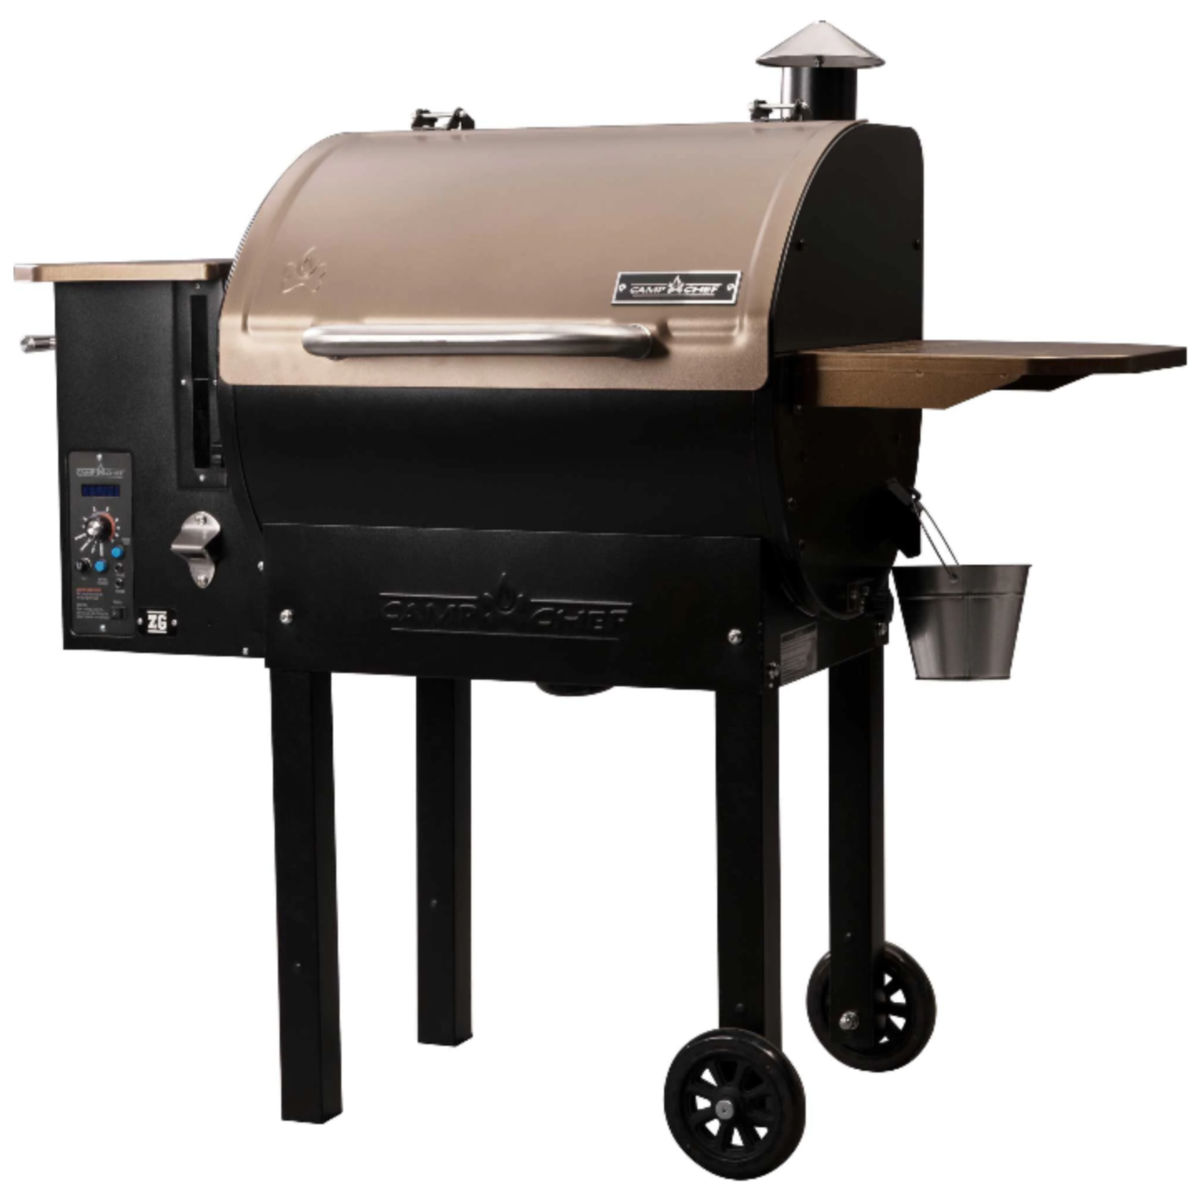 Camp Chef PG24ZG Slide and Grill 24-Inch Pellet Grill